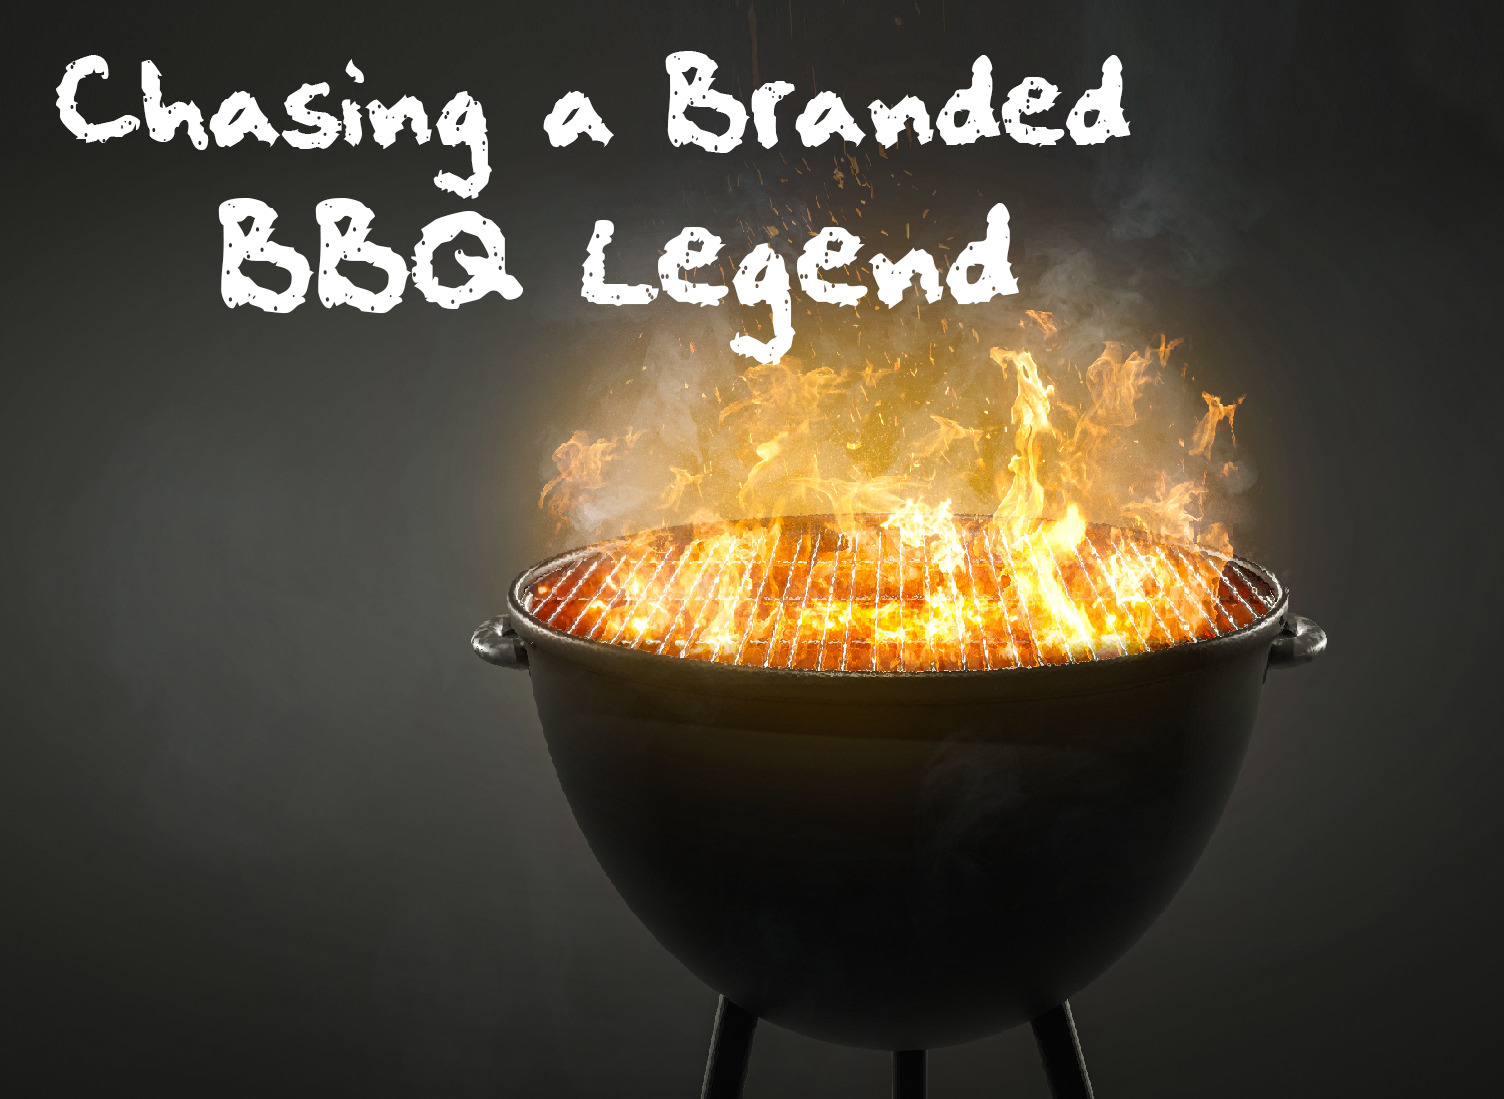 Chasing A Branded BBQ Legend